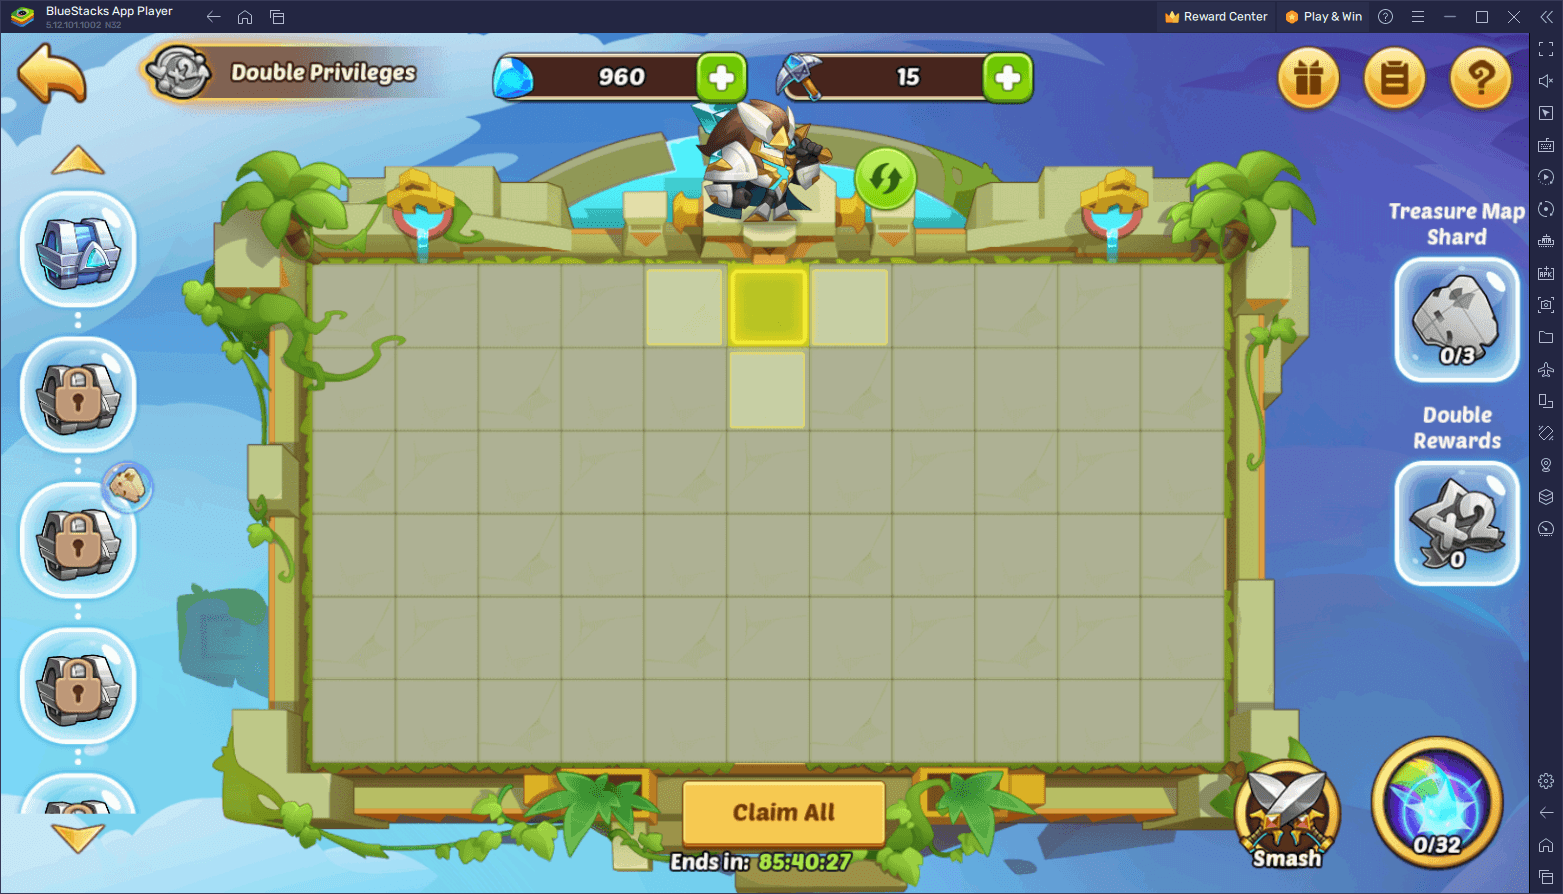 Idle Heroes August Update Arrives Bringing New Additions and Loot Opportunities